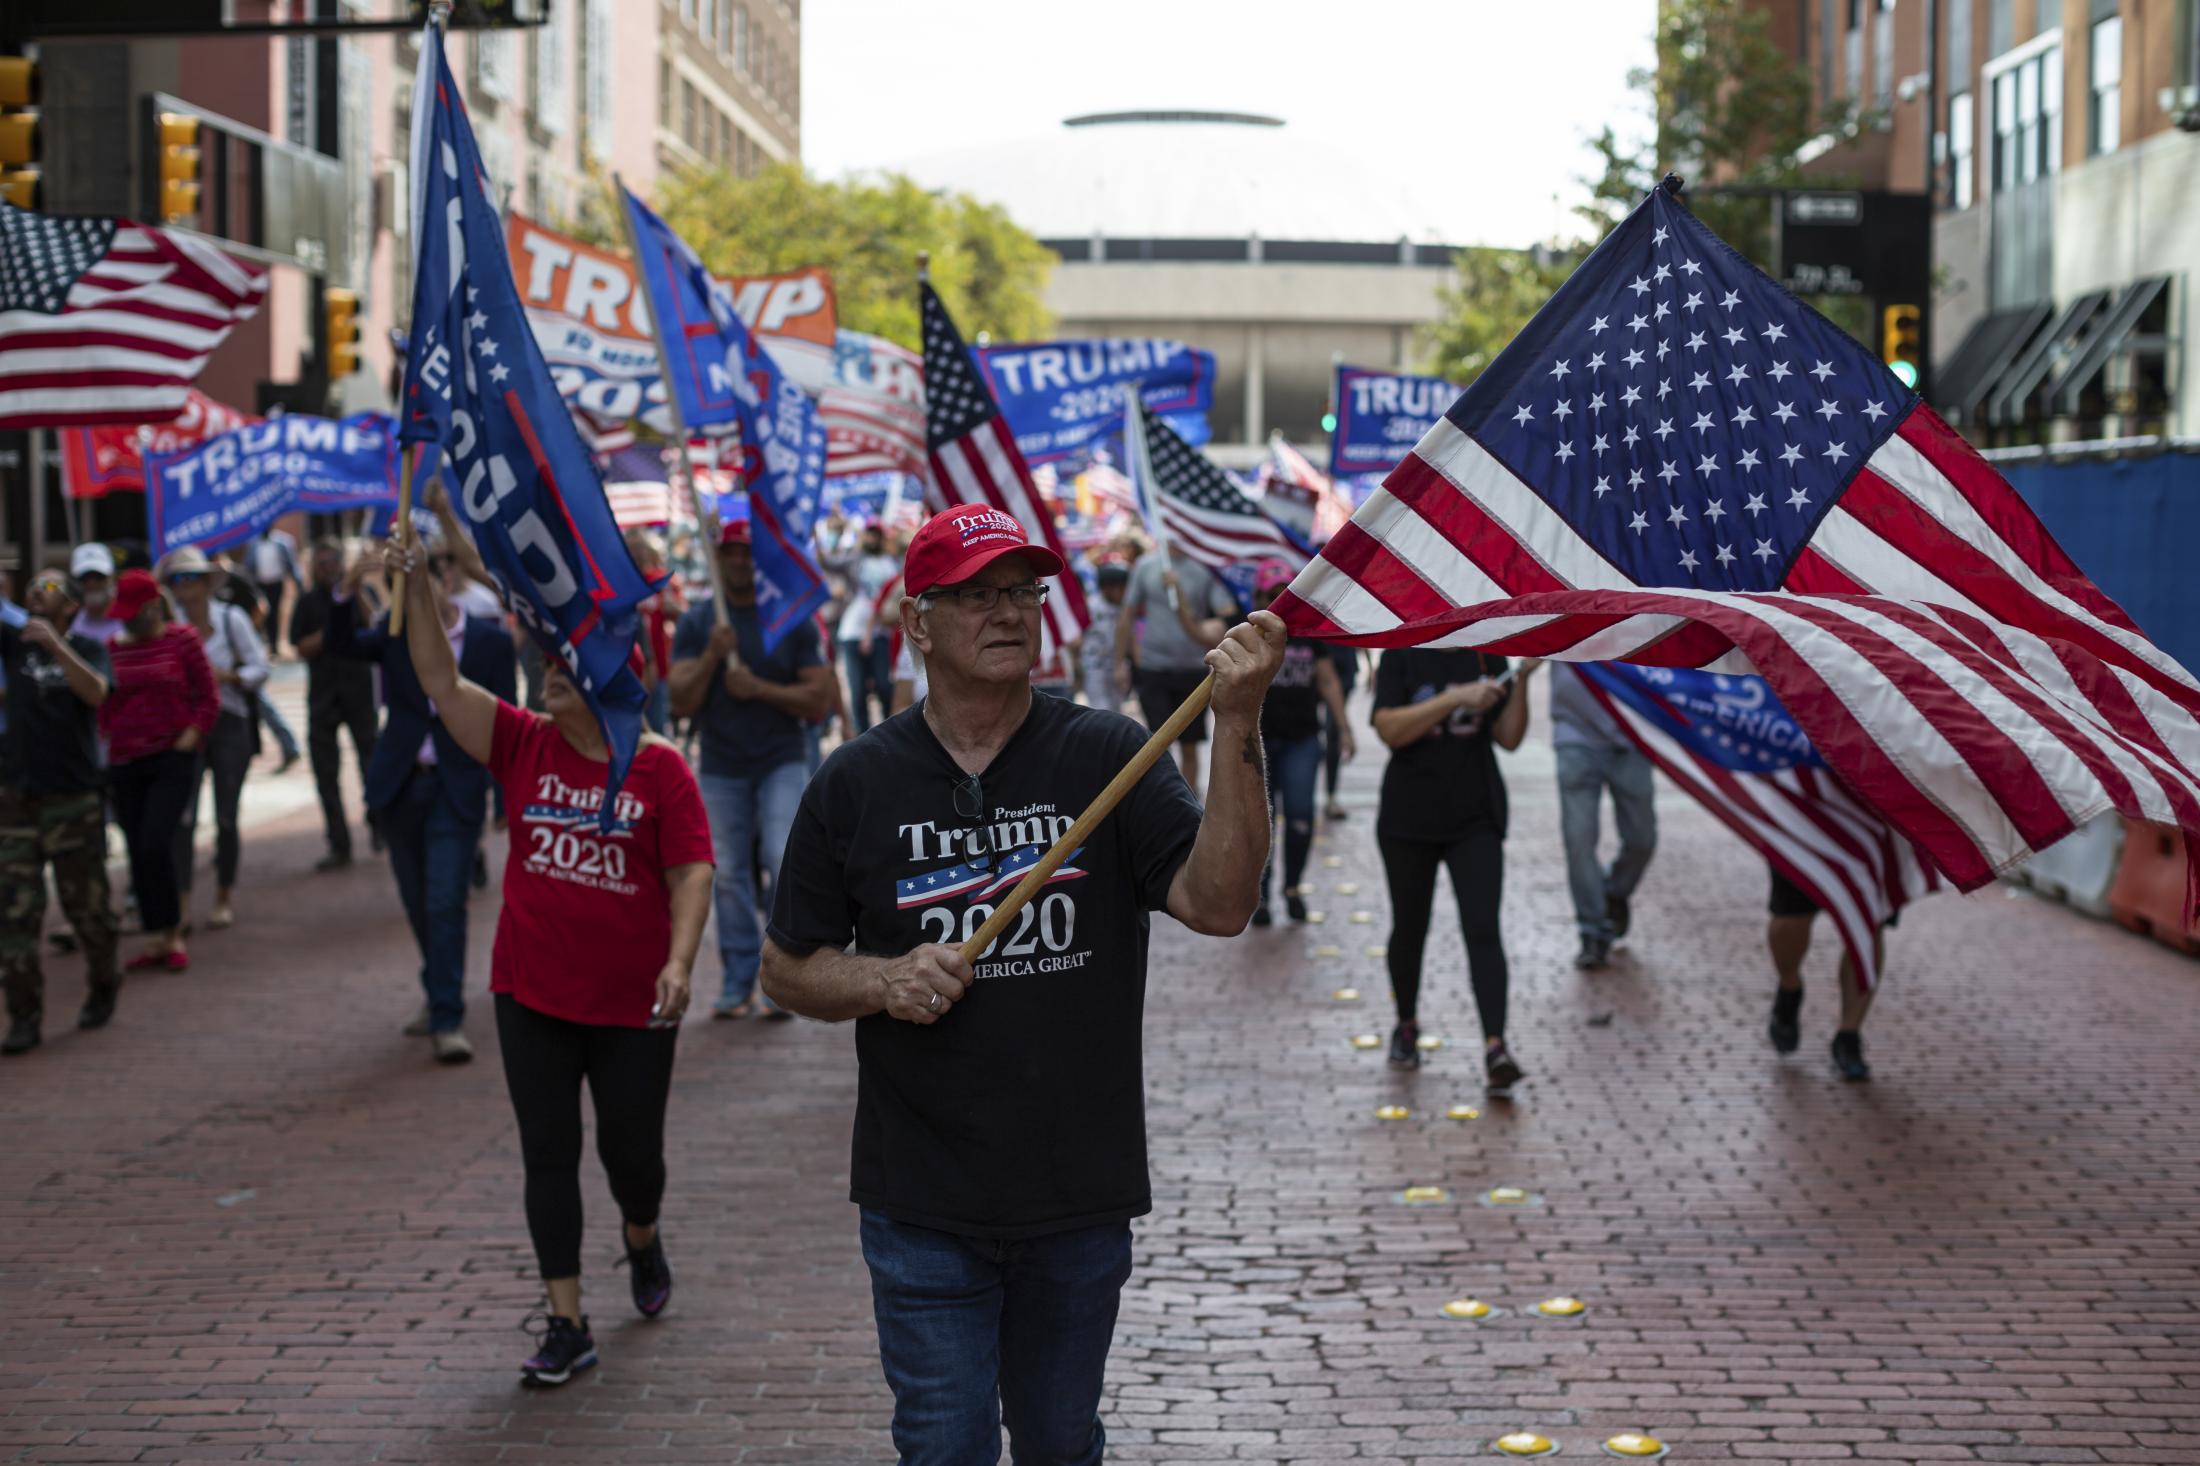 11/14/20 Fort Worth, Texas - A massive group of Trump Supporters held a rally and marched to the...